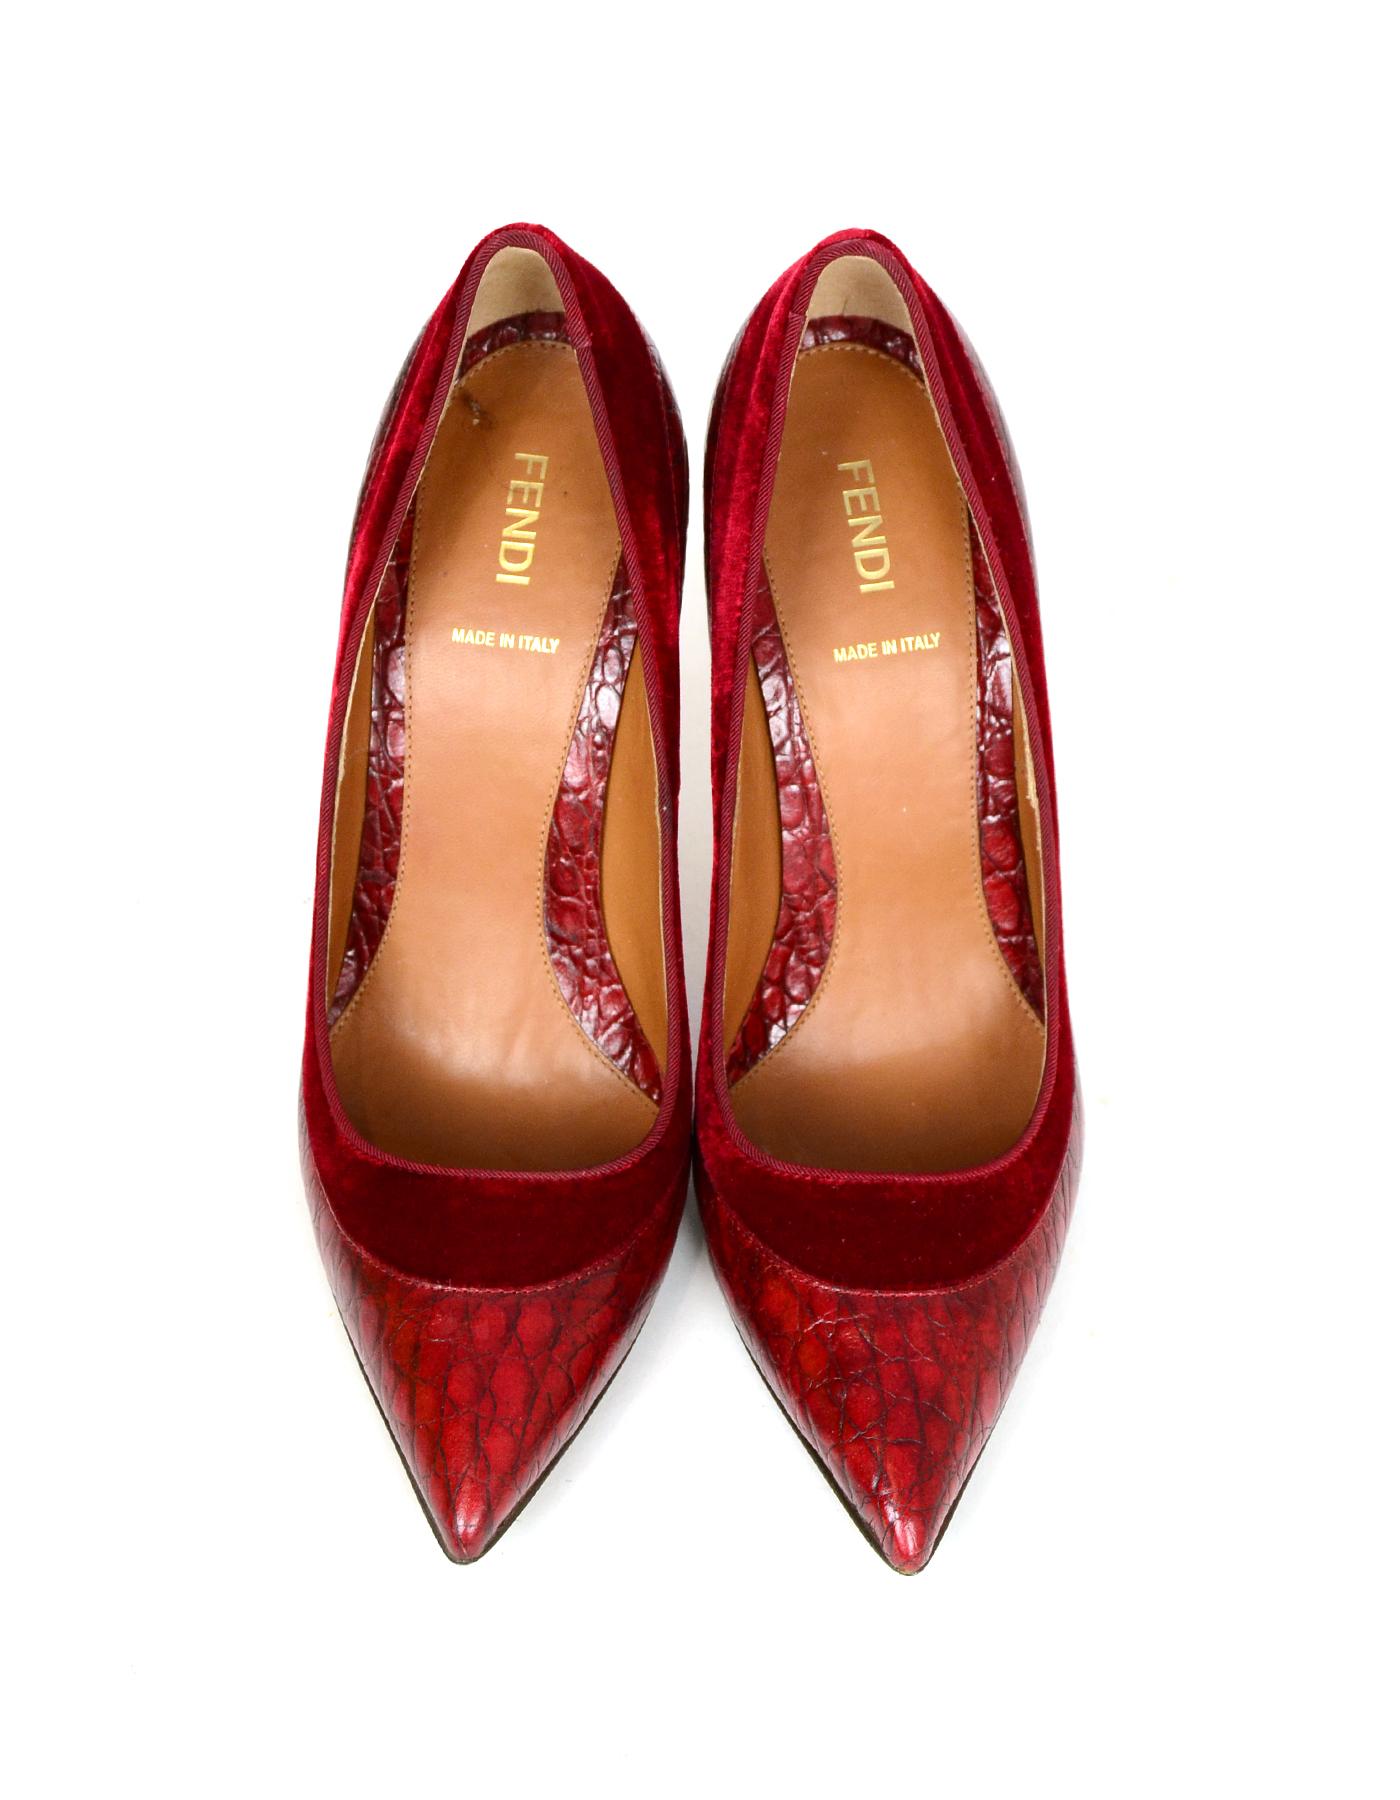 Fendi Burgundy Croc Embossed Pointed Toe Pumps w/ Velvet Trim sz 39 rt $790  In Excellent Condition In New York, NY